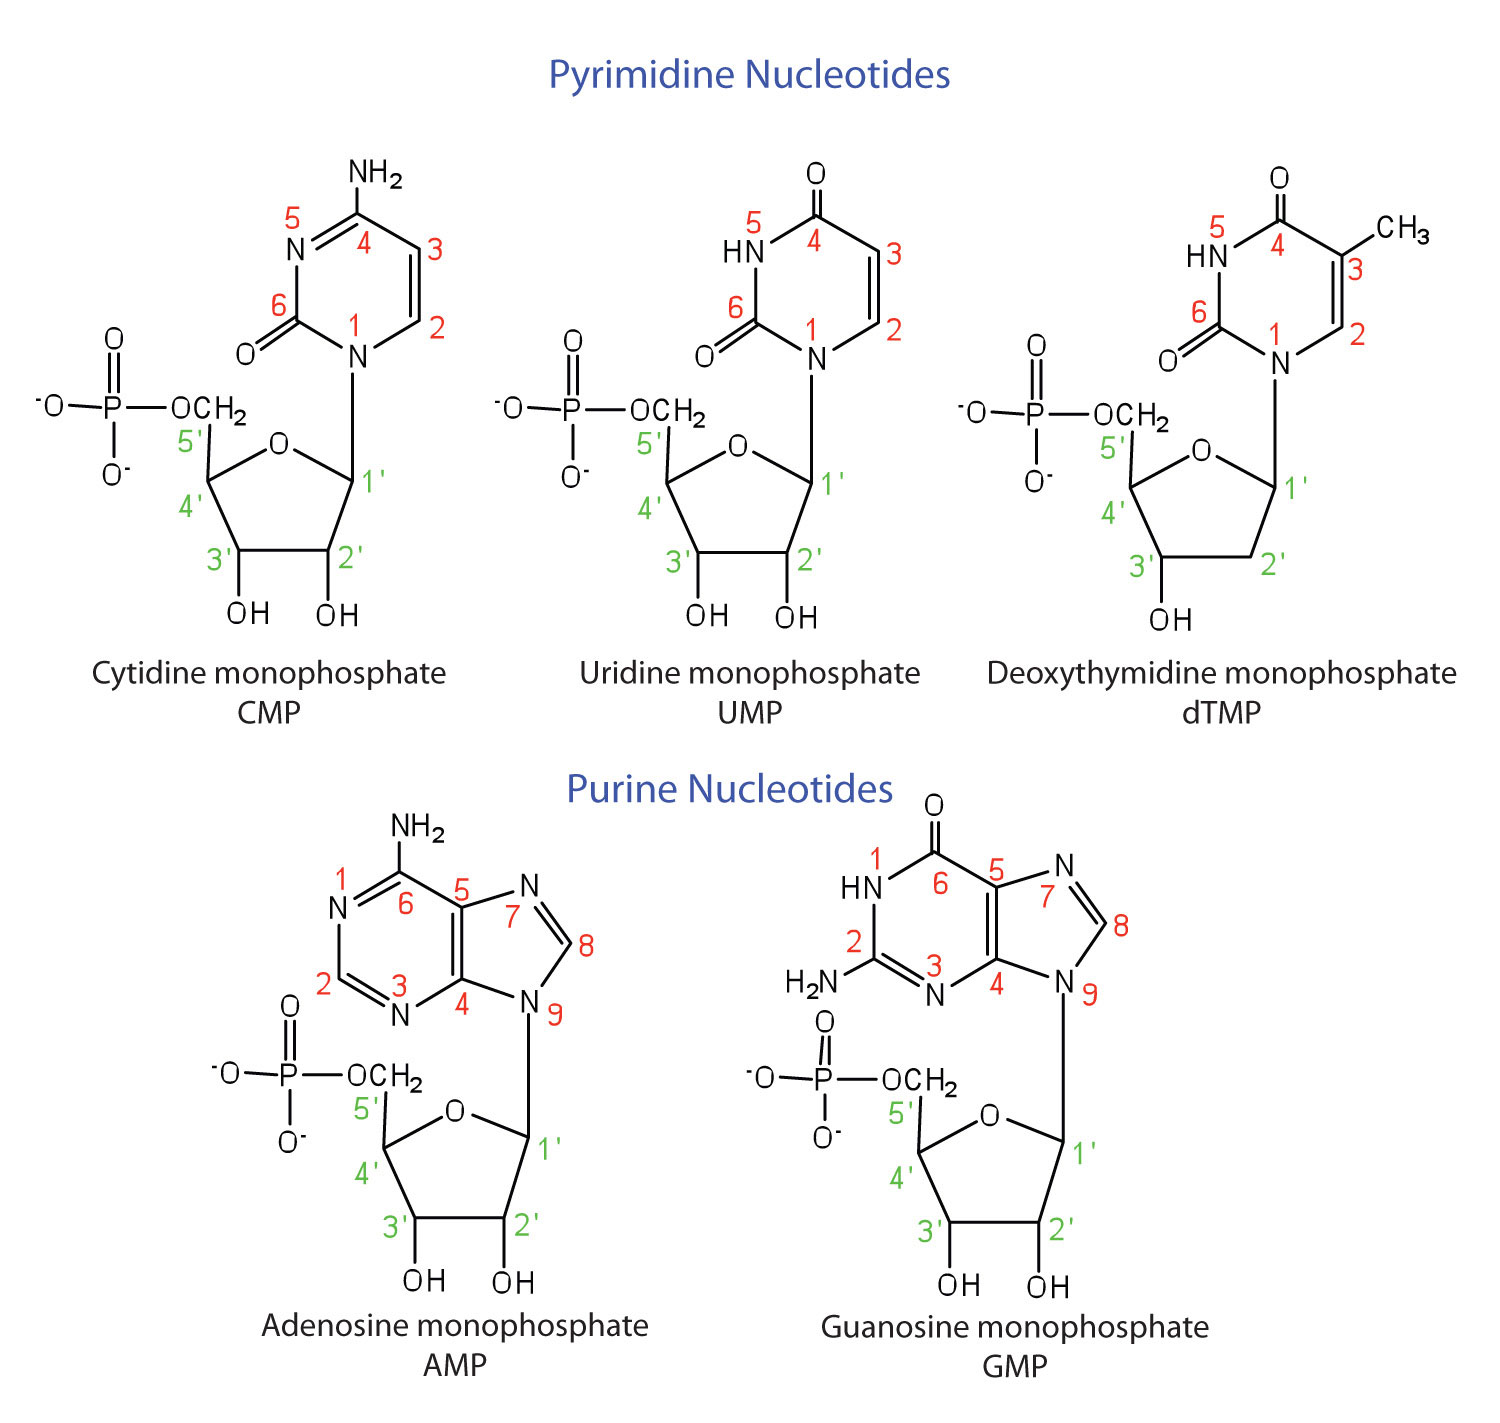 cytosine nucleotide structure